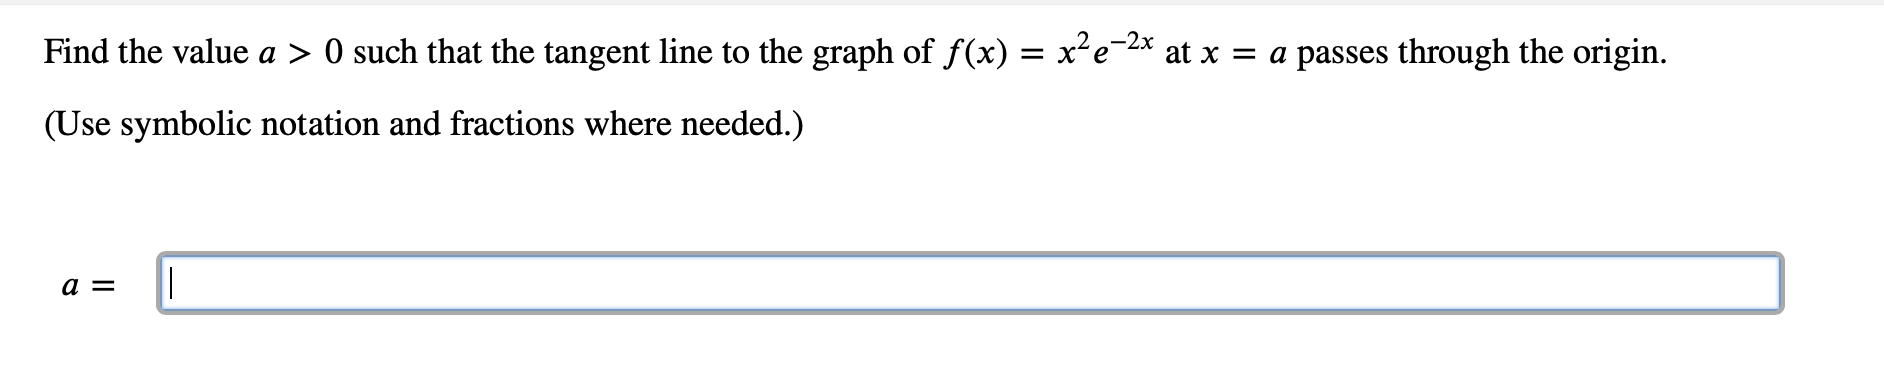 Find the value a > 0 such that the tangent line to the graph of f(x) = x²e-2x at x = a passes through the origin.
(Use symbolic notation and fractions where needed.)
a =
